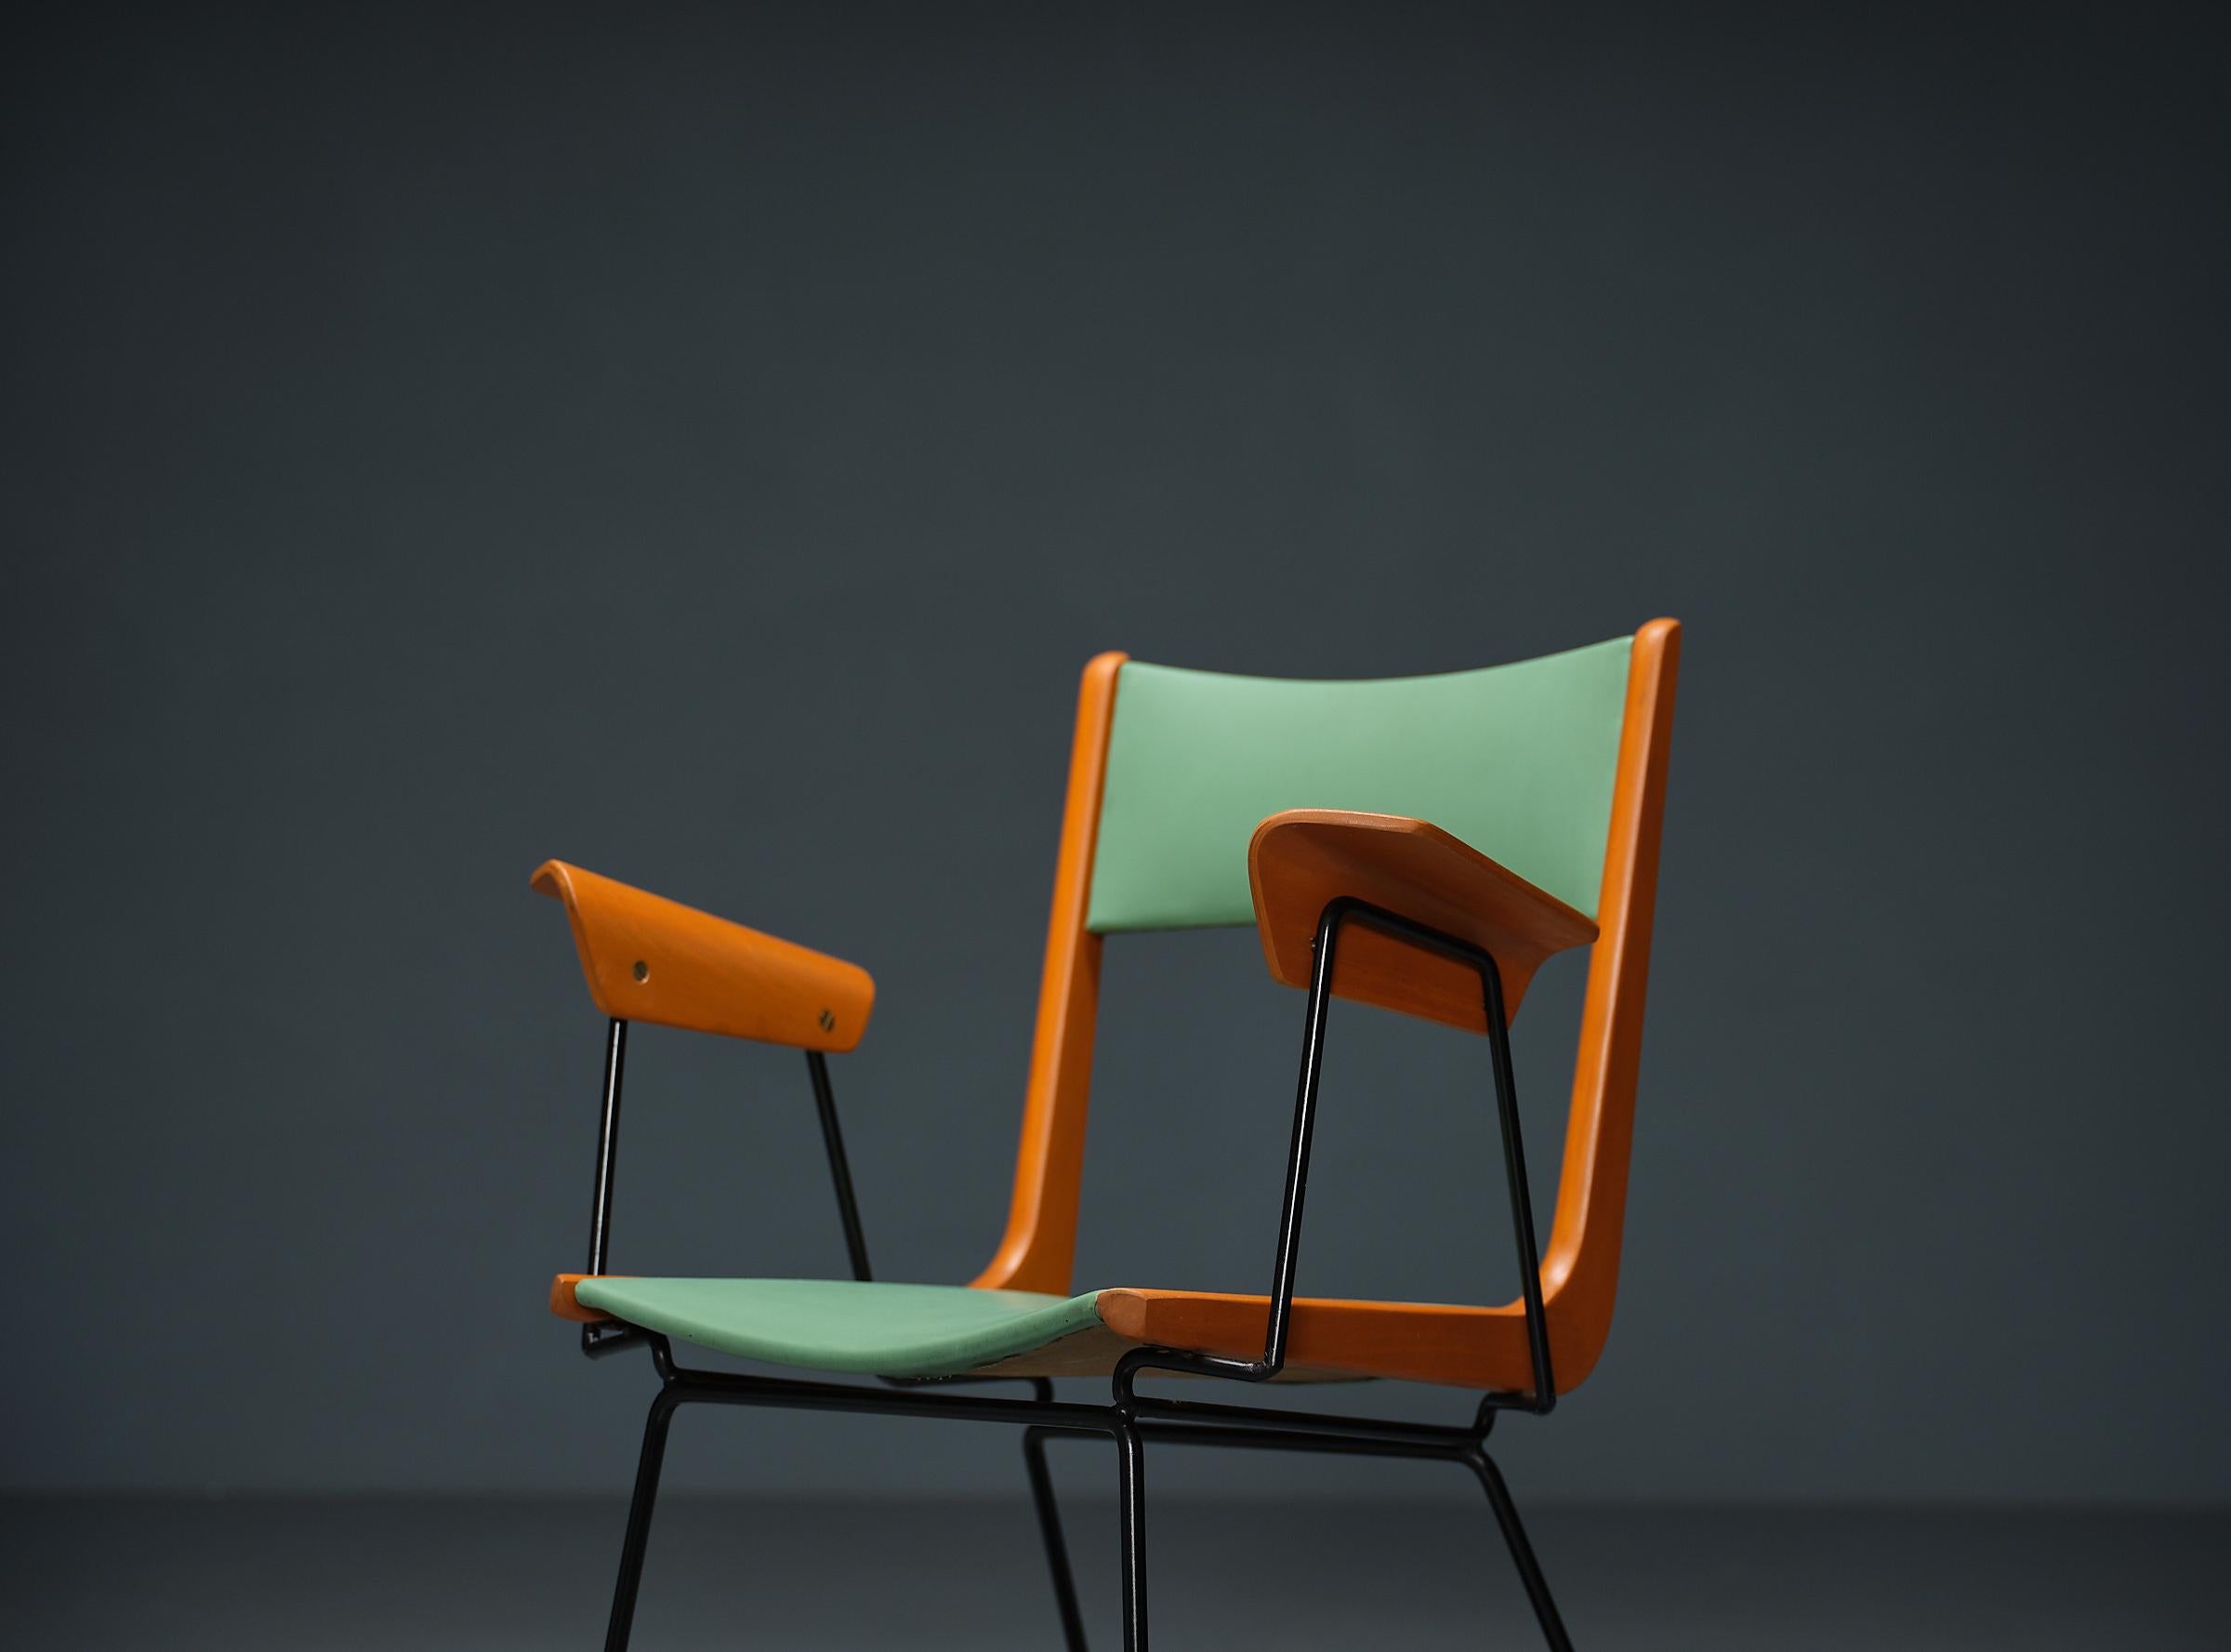 Italian-designed '' Boomerang '' Desk Chair by Carlo Ratti. This modern and playful chair exudes joy with its colorful and cheerful Skai upholstery in original green, perfectly complementing its restored wooden frame crafted from beechwood and black